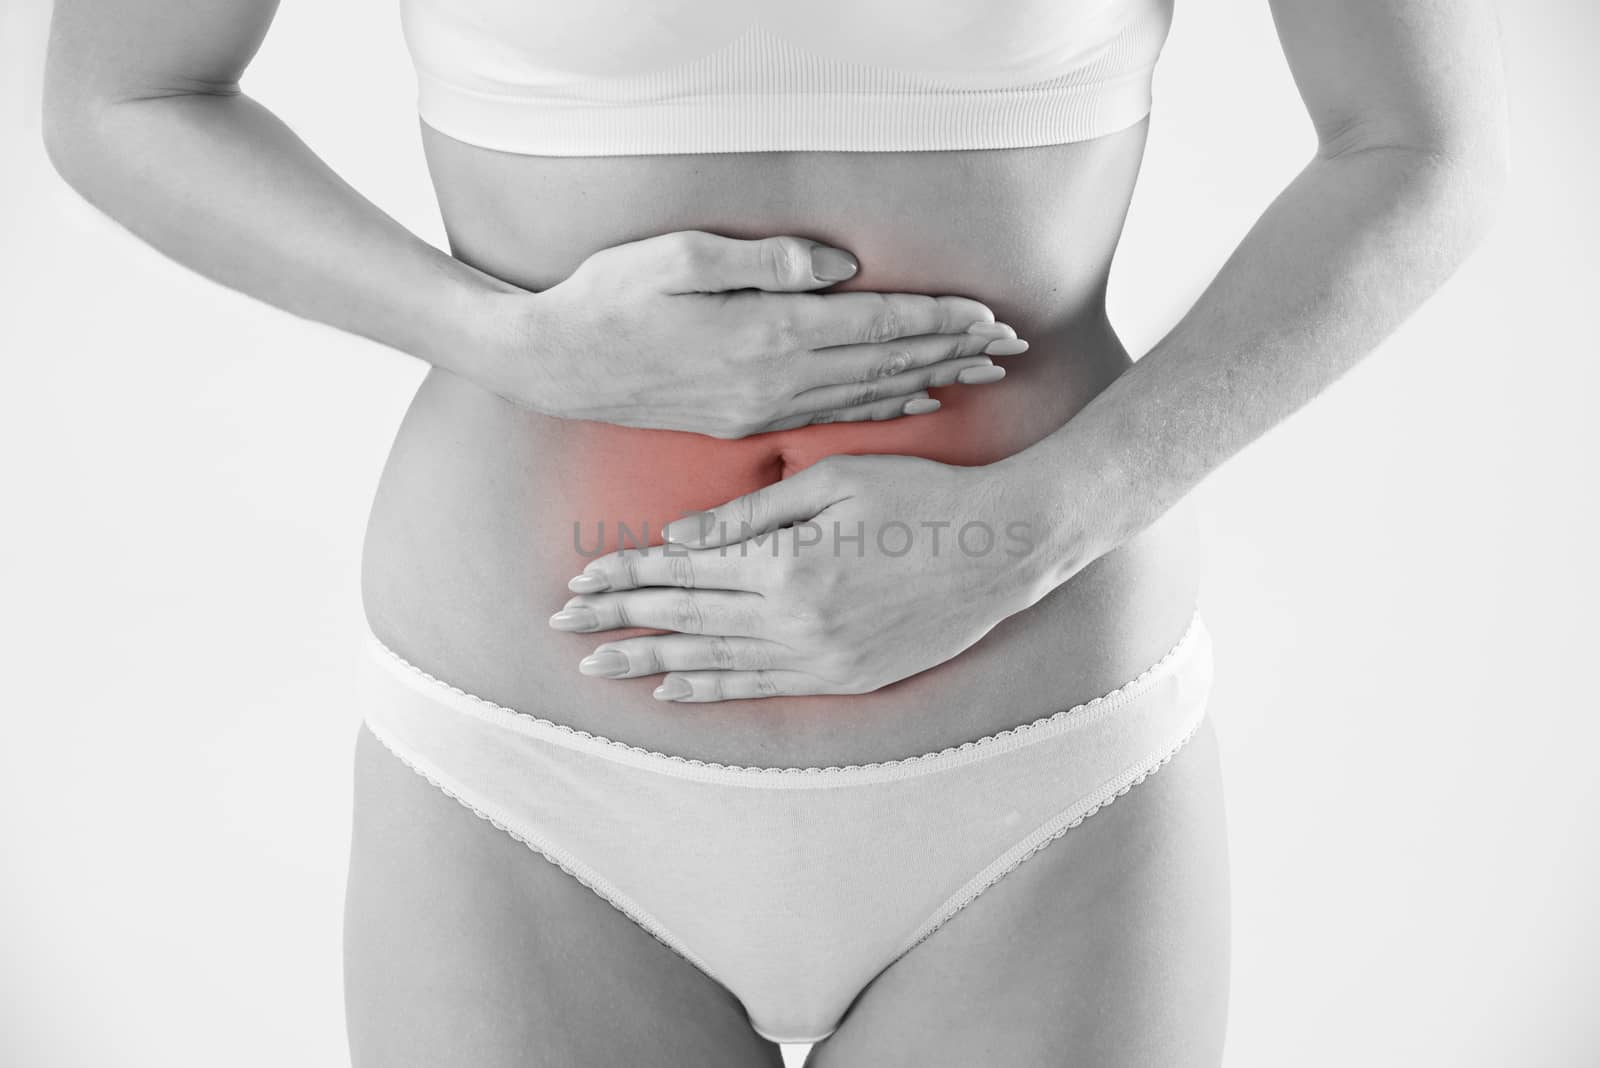 Monochrome Shot Of Woman In Underwear Holding Stomach In Pain